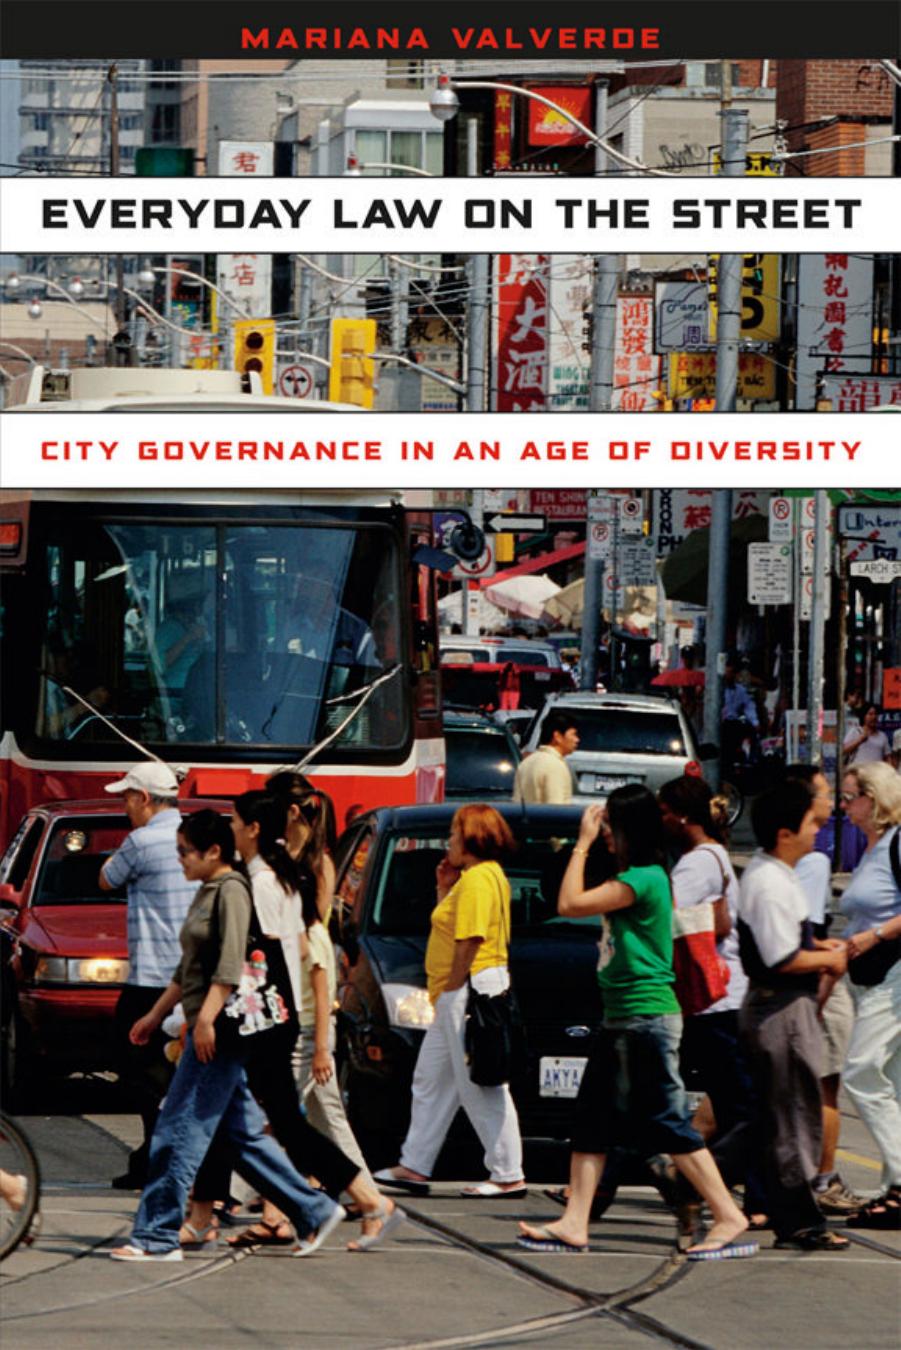 Everyday Law on the Street â City Governance in an Age of Diversity (Chicago Series in Law and Society) by Mariana Valverde